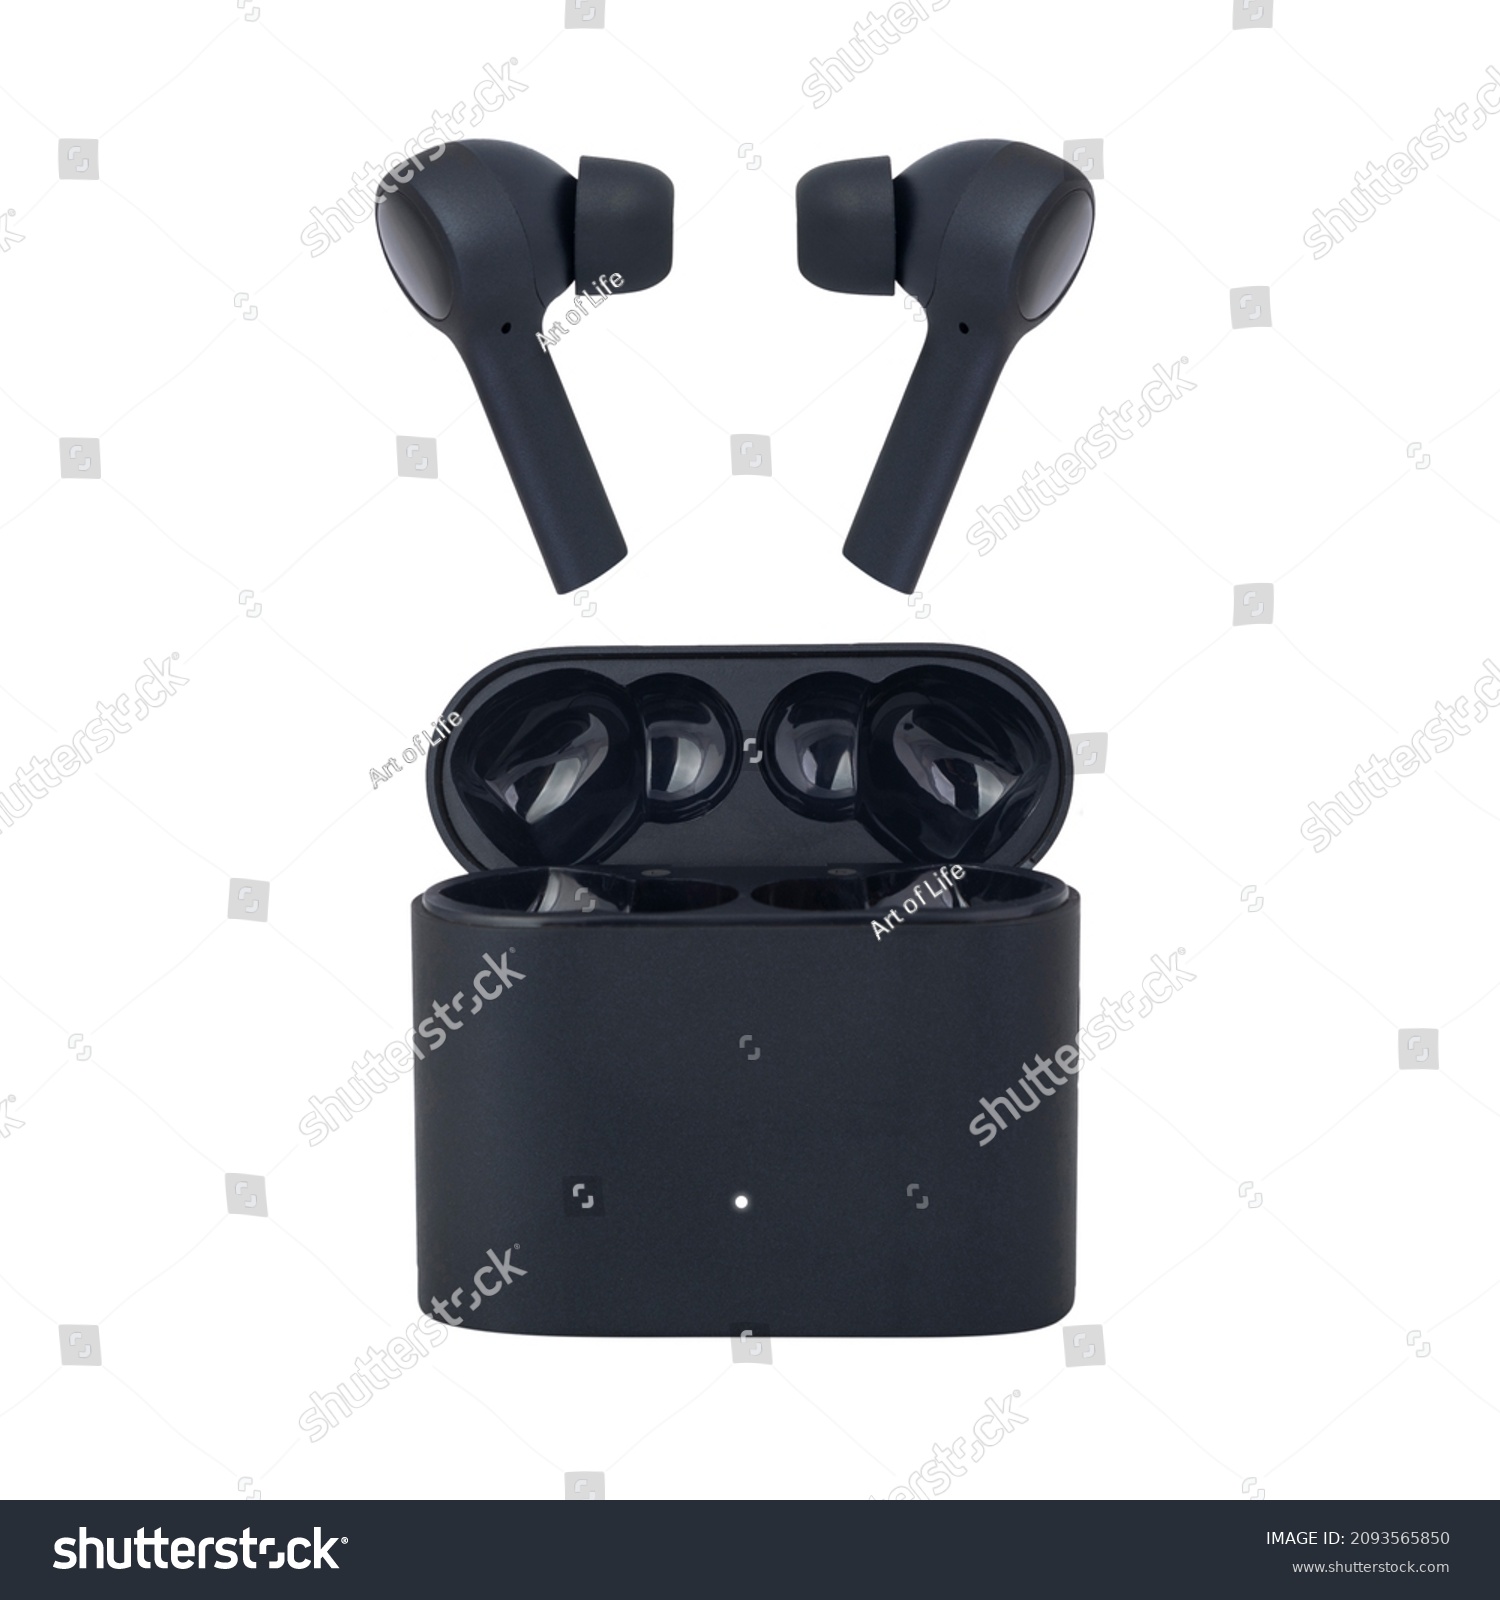 Wireless headphones on a white background. Headset close up in the charging case. #2093565850